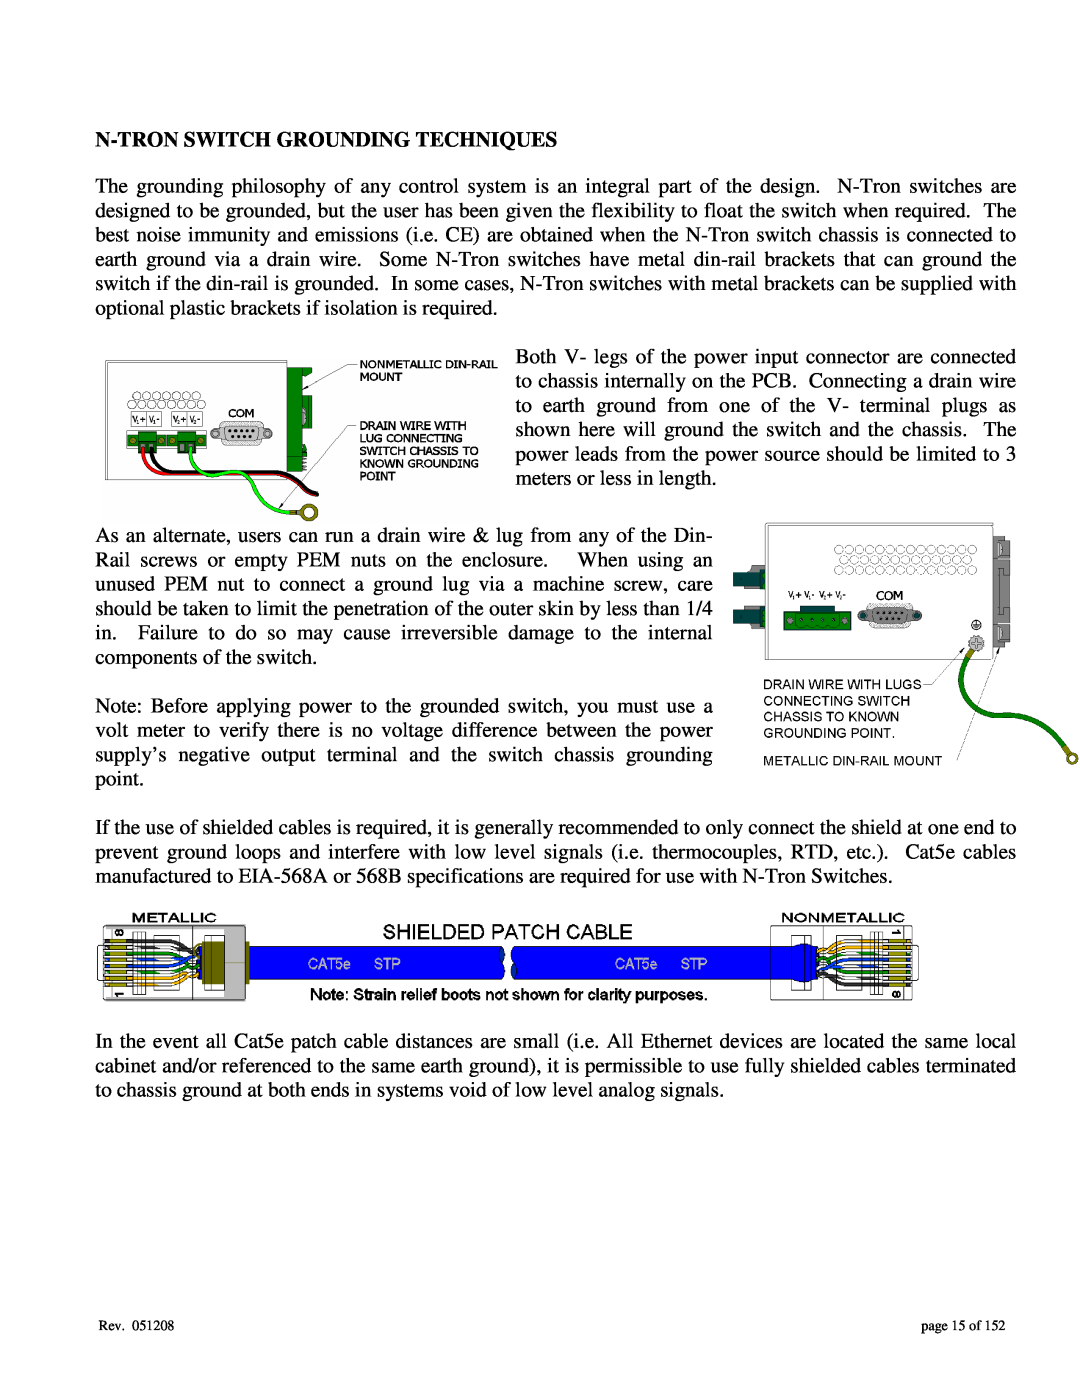 Gigabyte 7014 user manual N-Tron Switch Grounding Techniques, page 15 of 